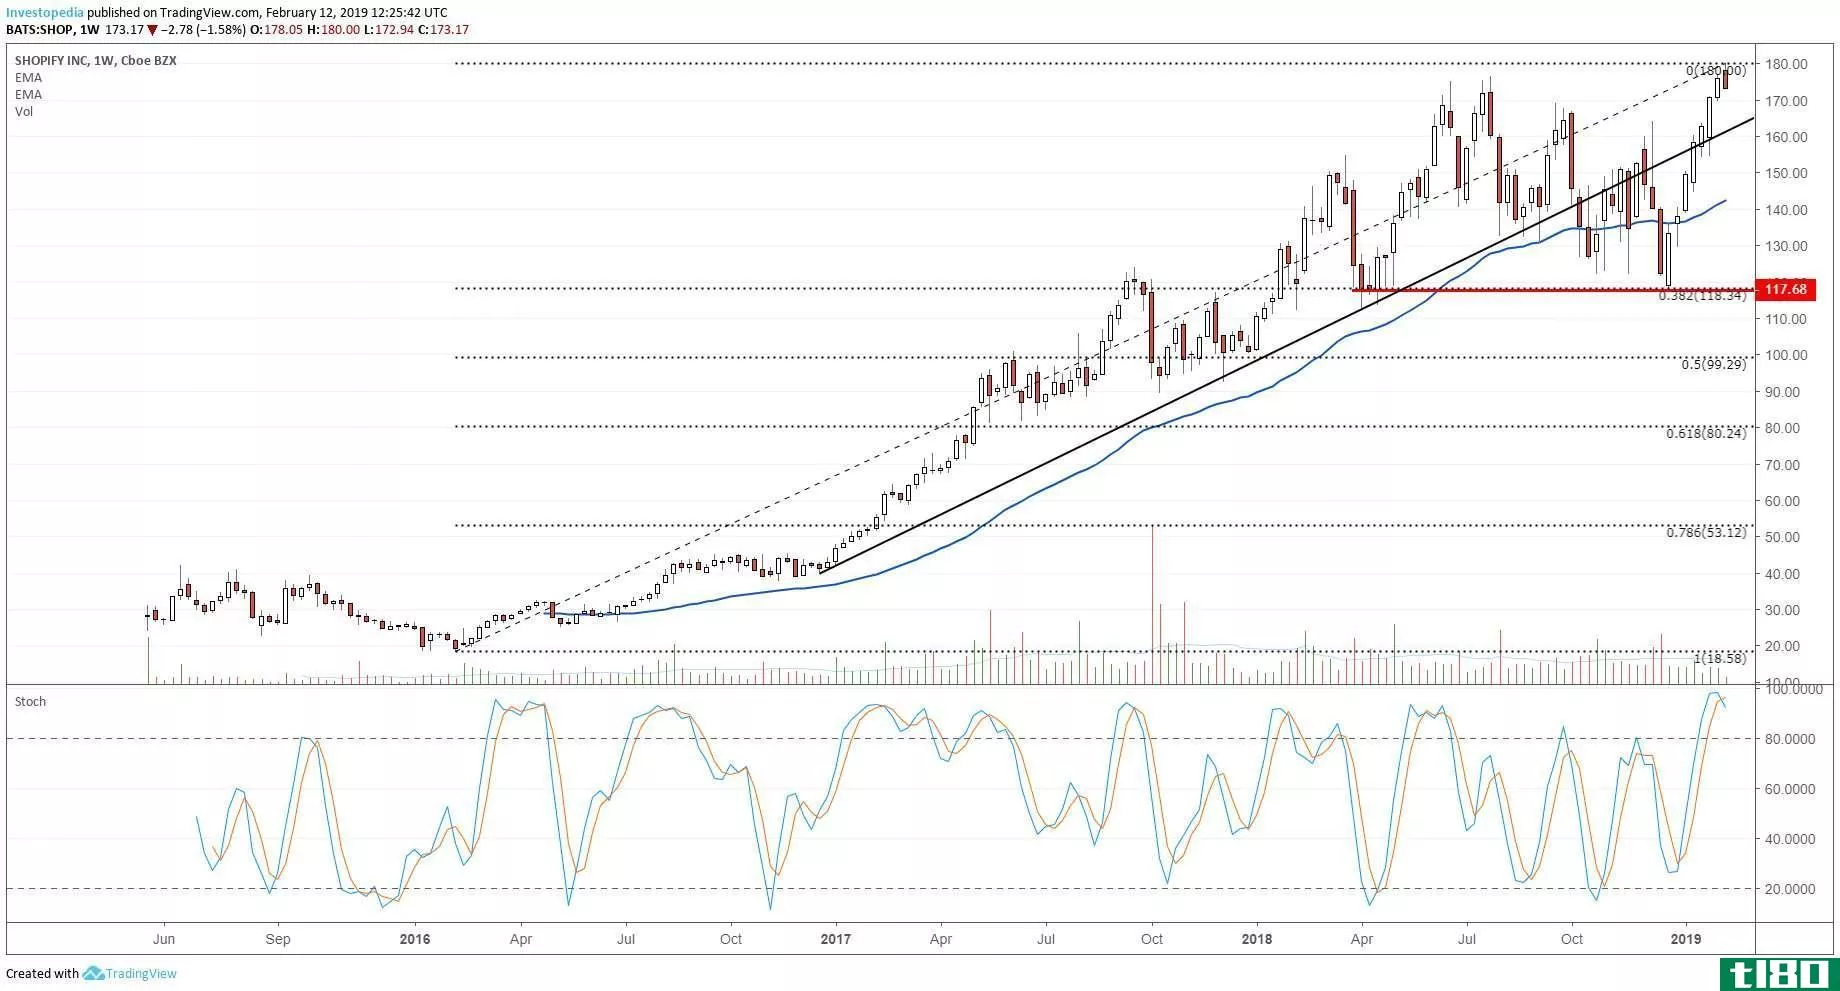 Weekly technical chart showing the share price performance of Shopify Inc. (SHOP)